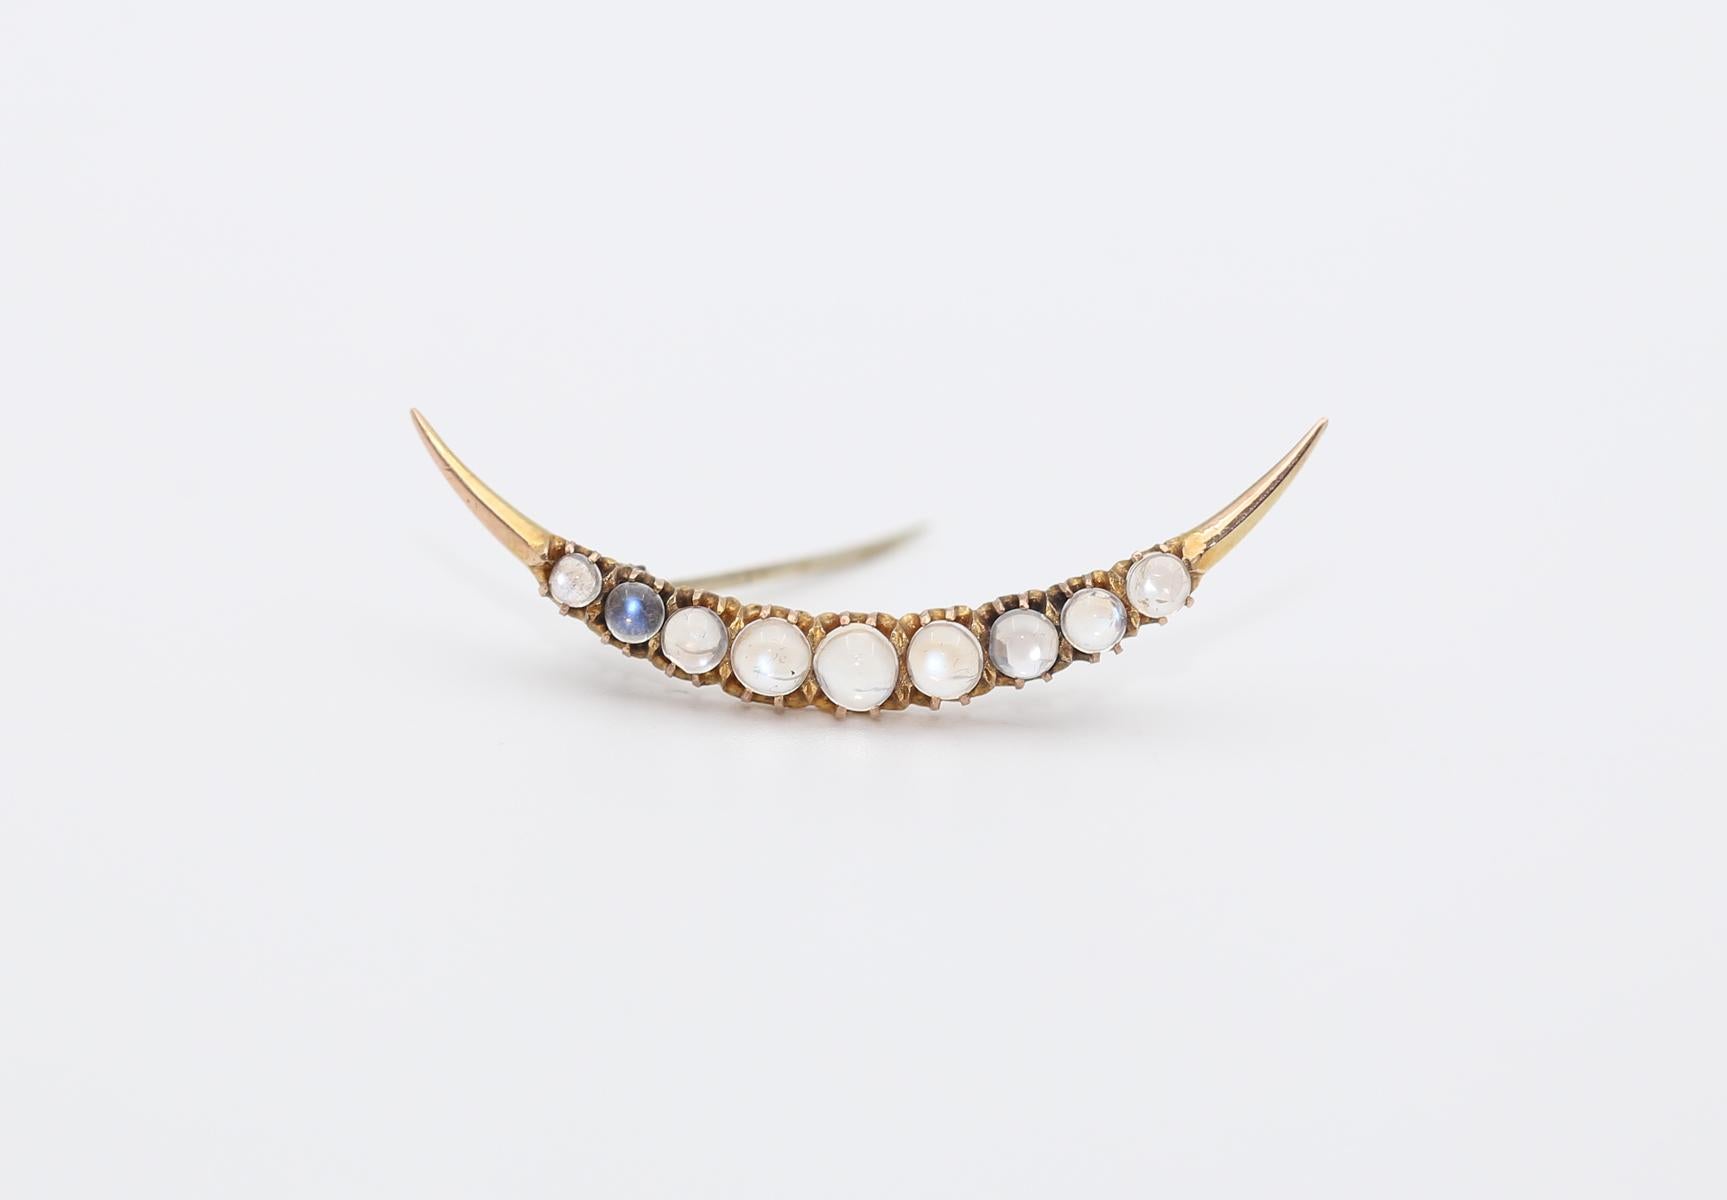 Moonstone Crescent Moon Brooch Yellow Gold, 1900

Antique Moonstone Crescent Moon brooch in yellow gold, designed as a crescent moon set with a row of round cabochon moonstones, no assay marks, 4.5cm, 2.6g.

The color of the stones is just wonderful